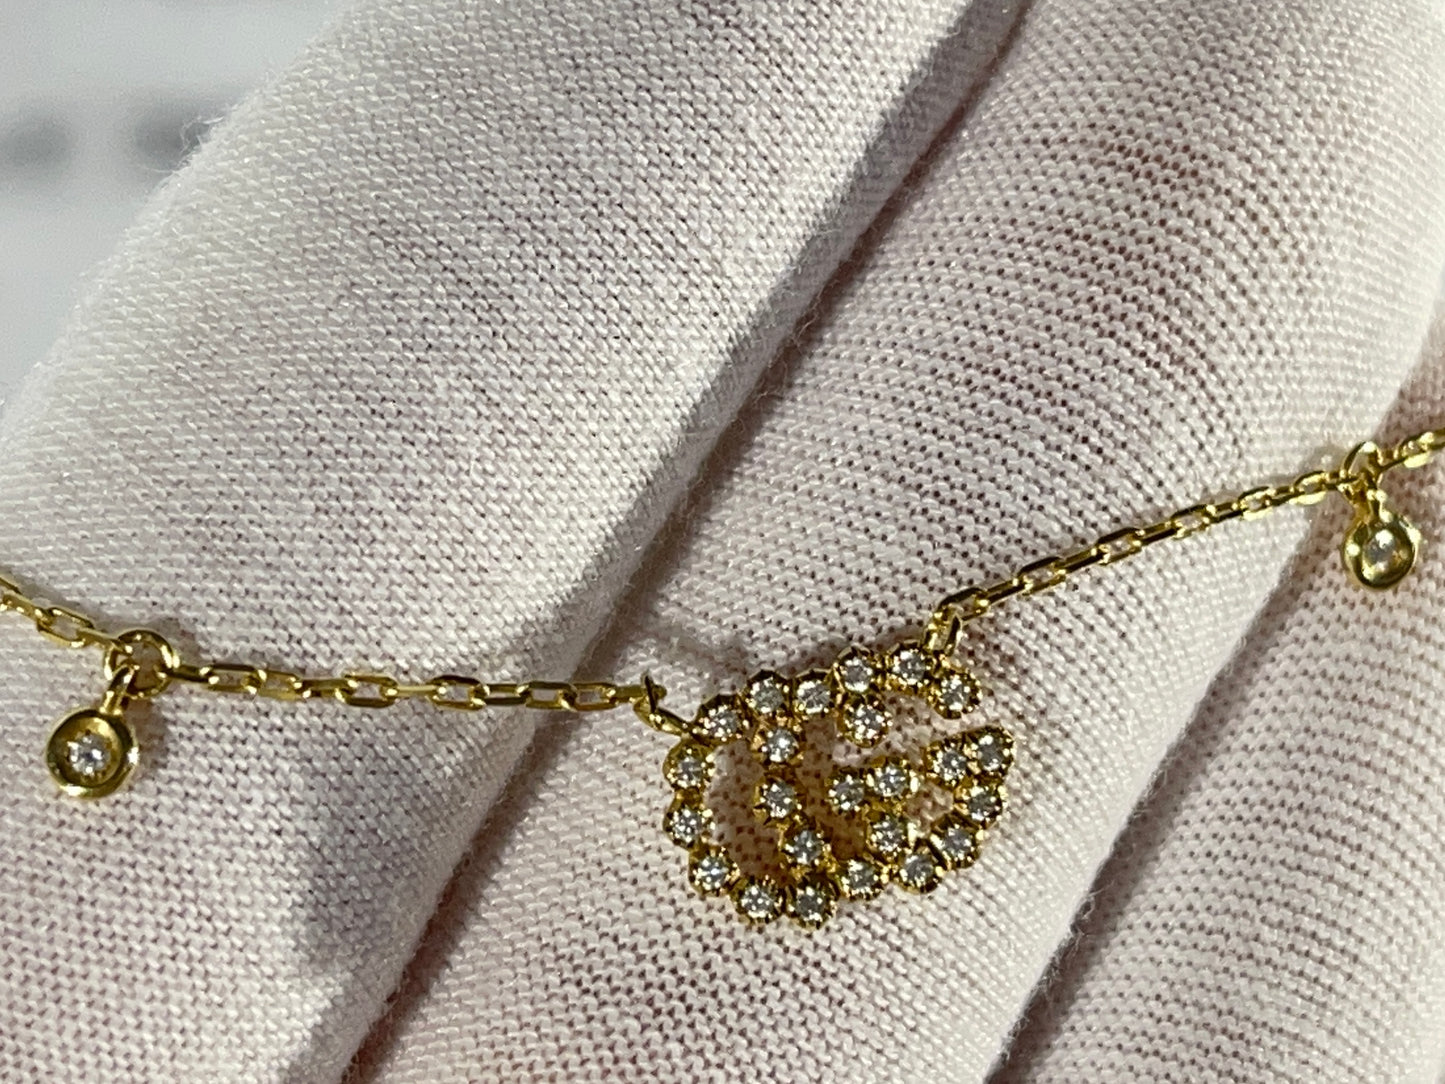 Gucci 18K Yellow Gold GG Running Necklace with Diamonds